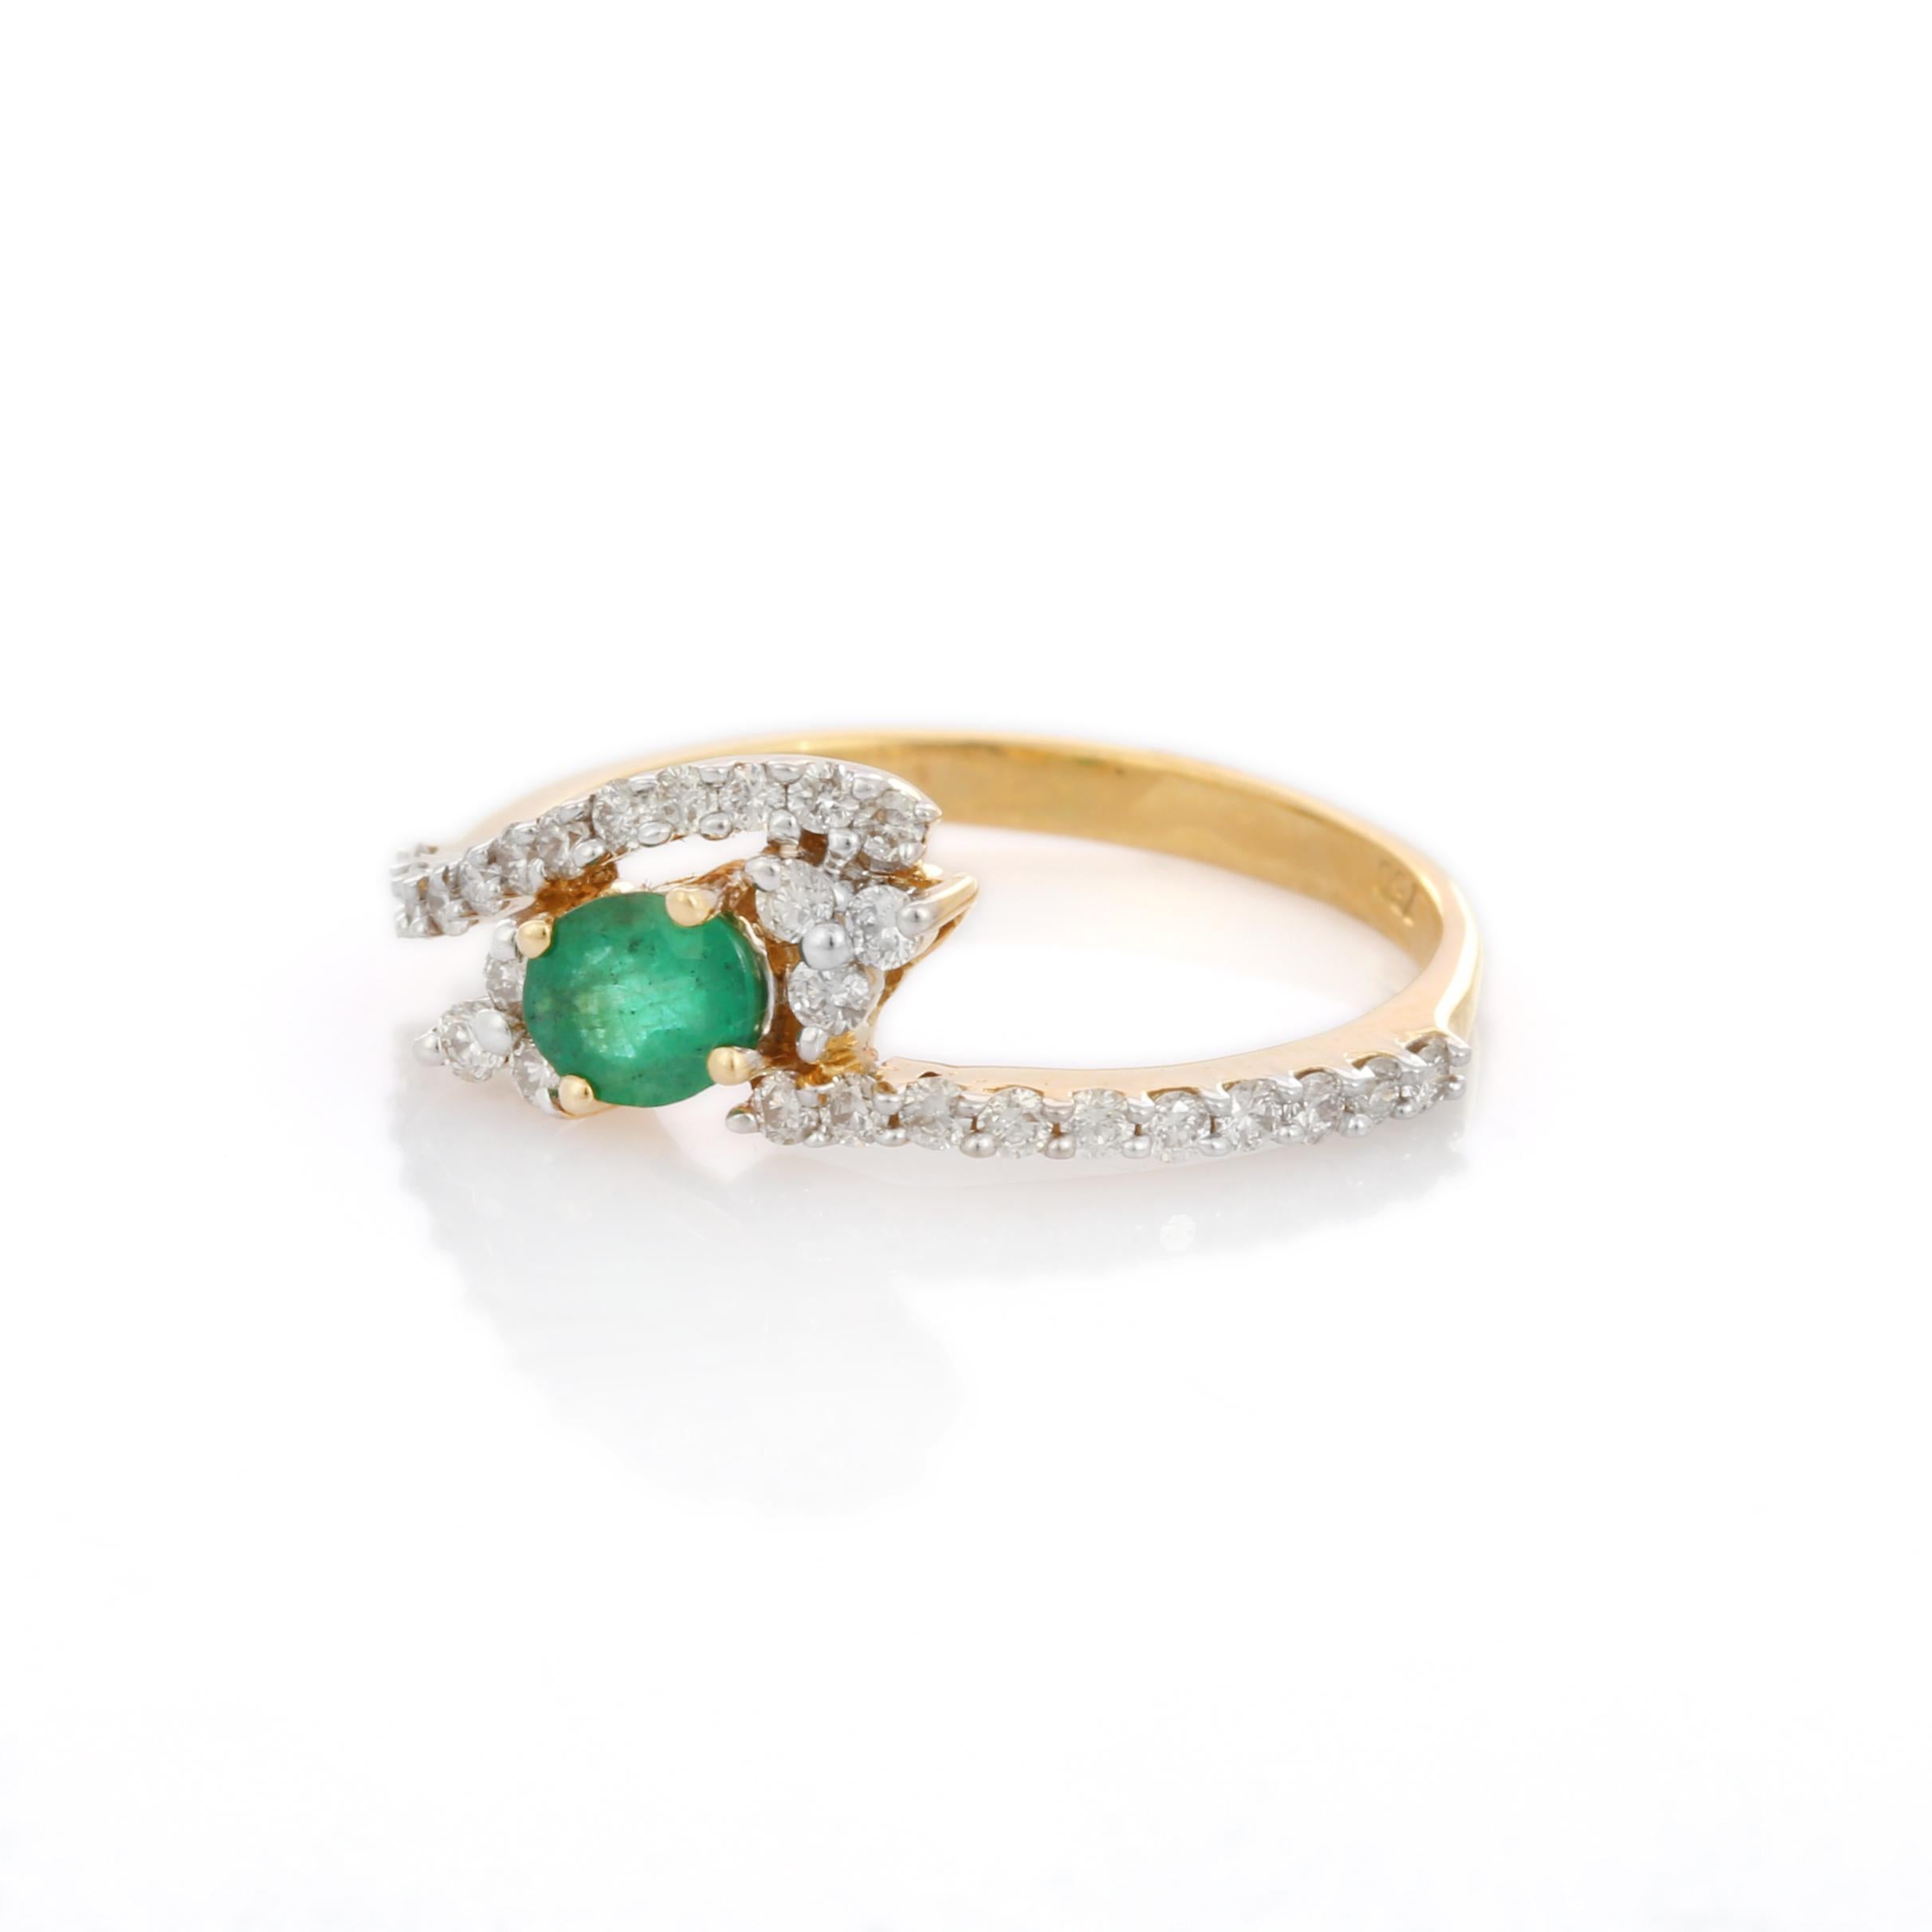 For Sale:  18K Yellow Gold Oval Shaped Emerald and Diamond Ring  4